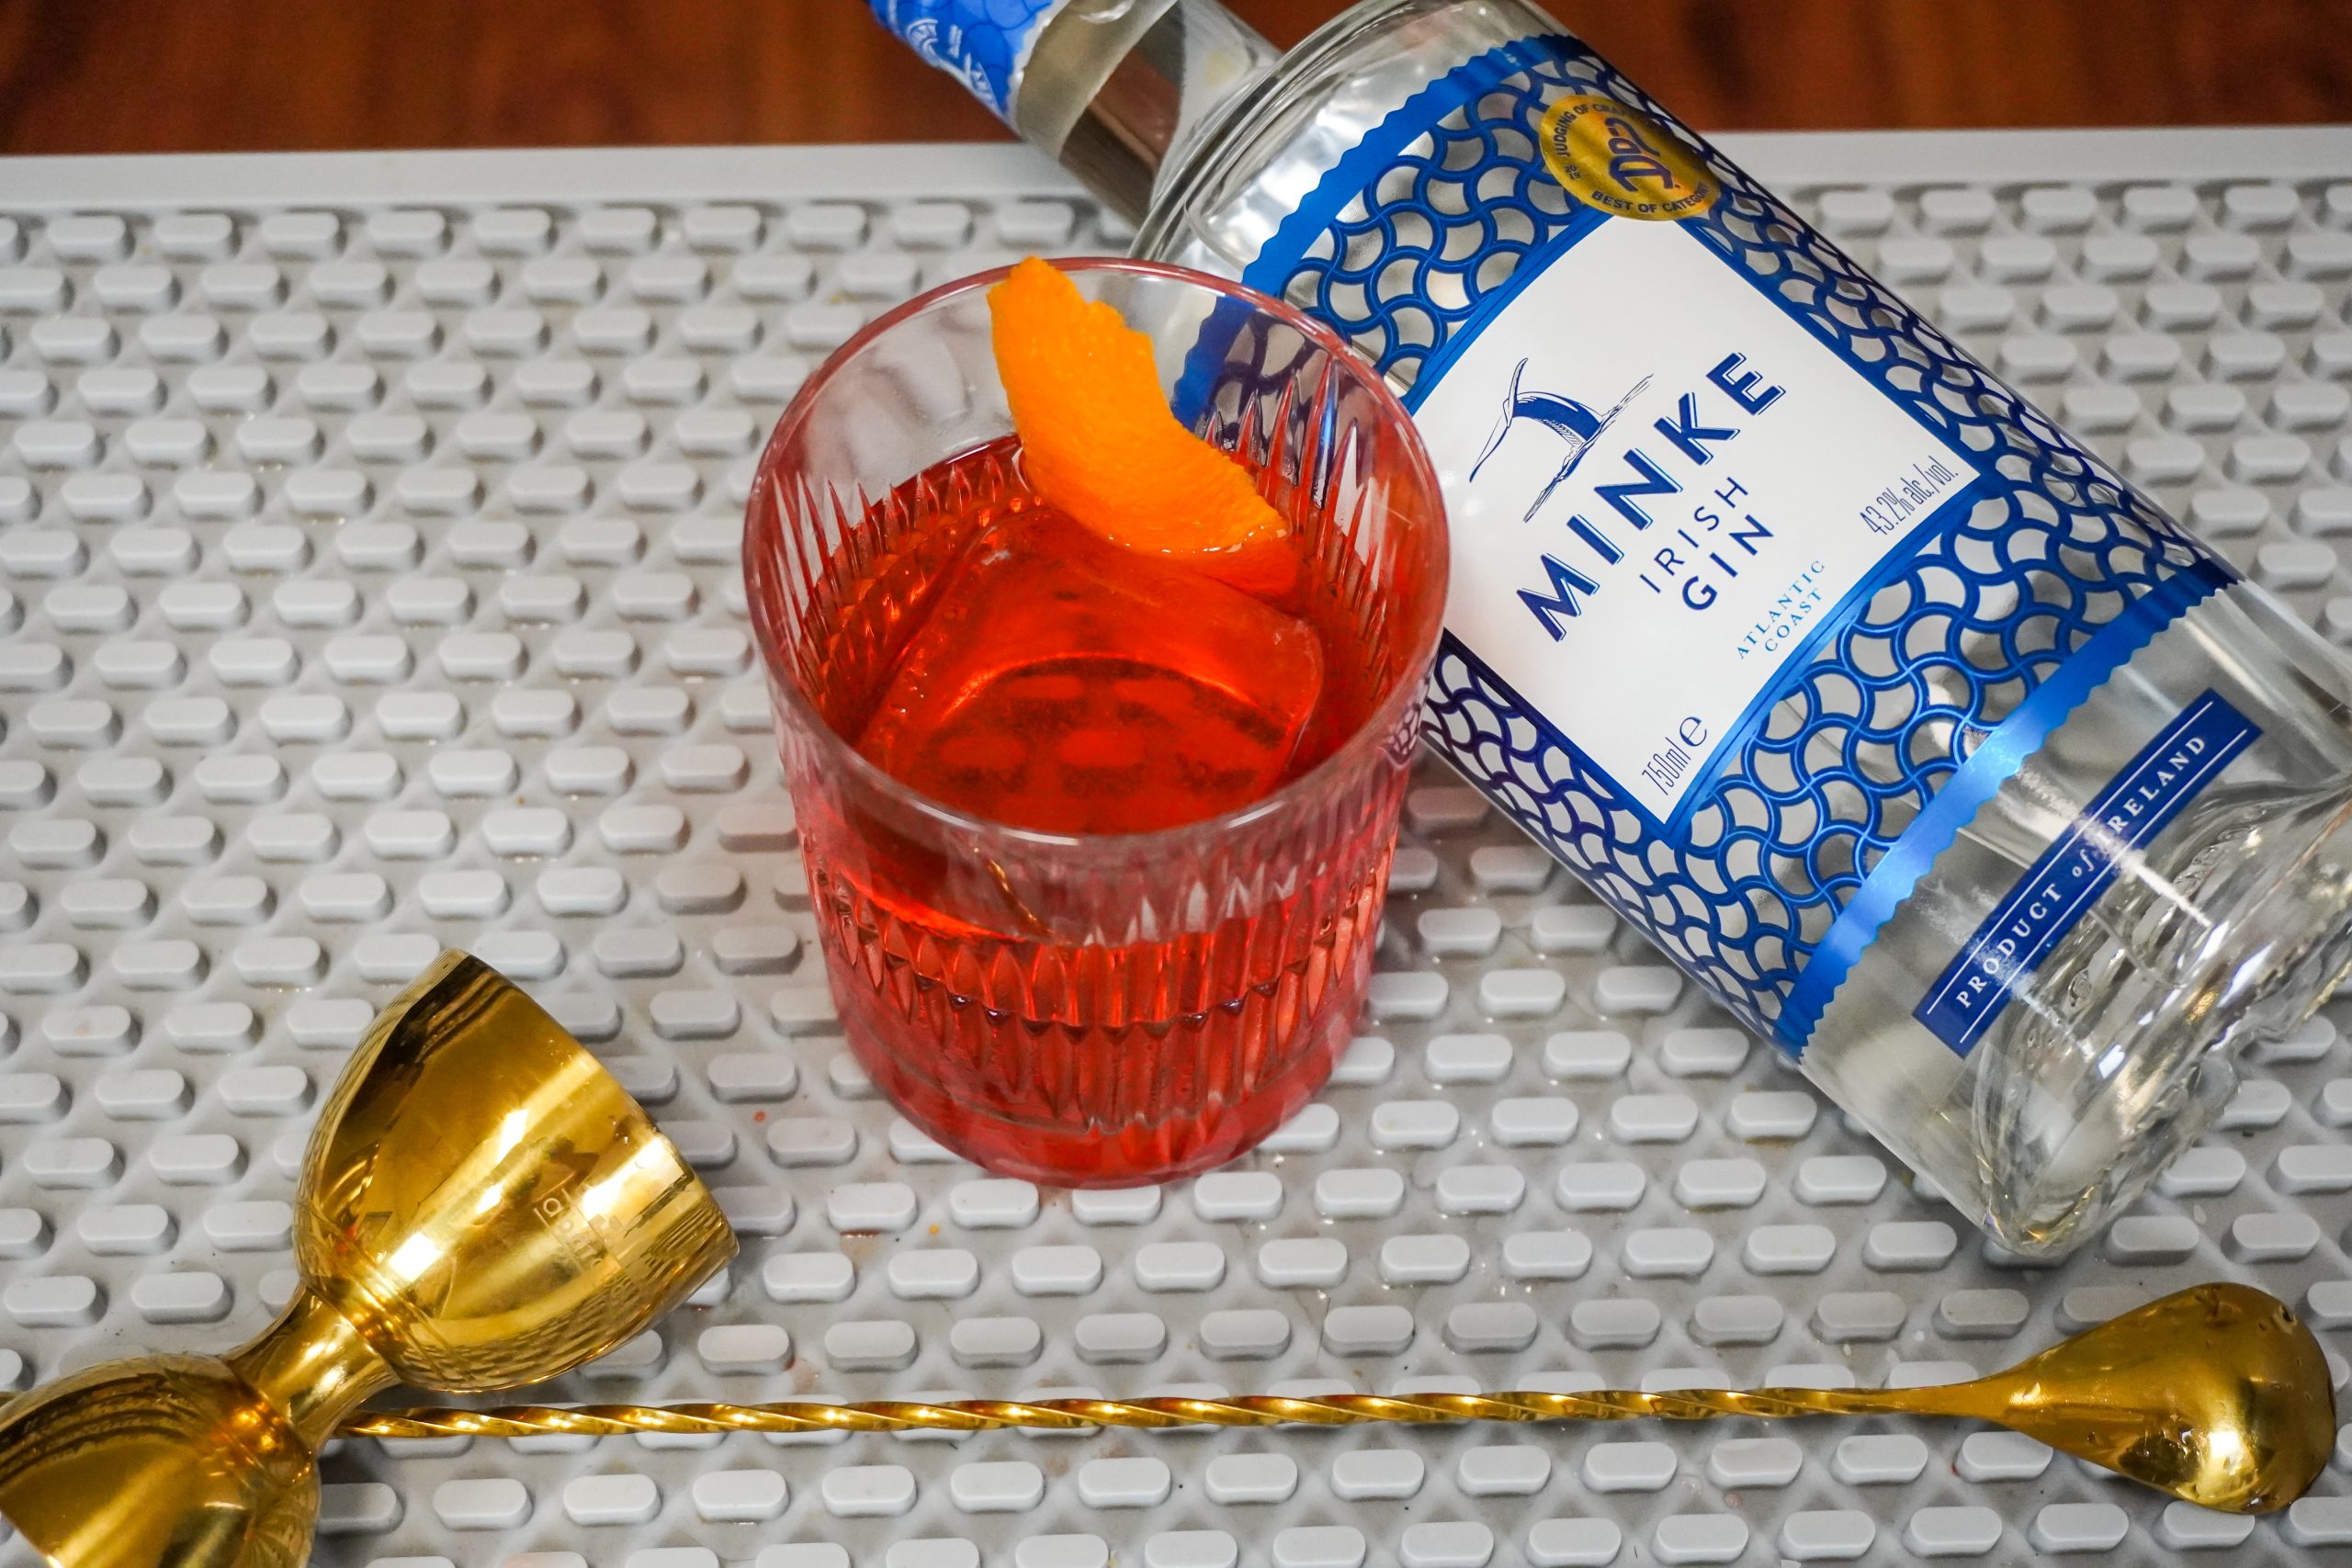 Negroni, a favorite cocktail, with orange garnish and fortified wine, a cocktail jigger, and bar spoon